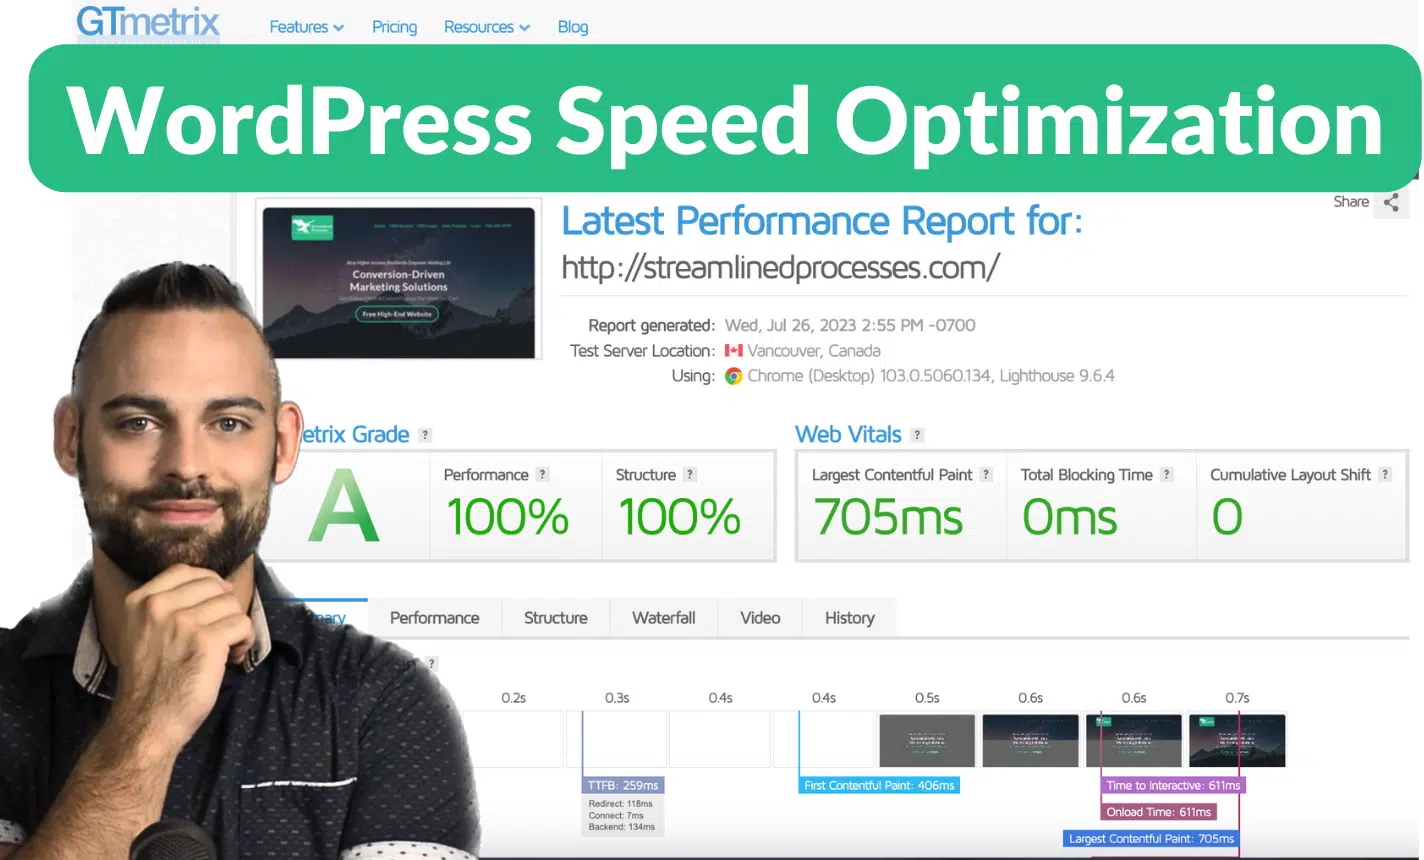 Speed and Performance Optimized